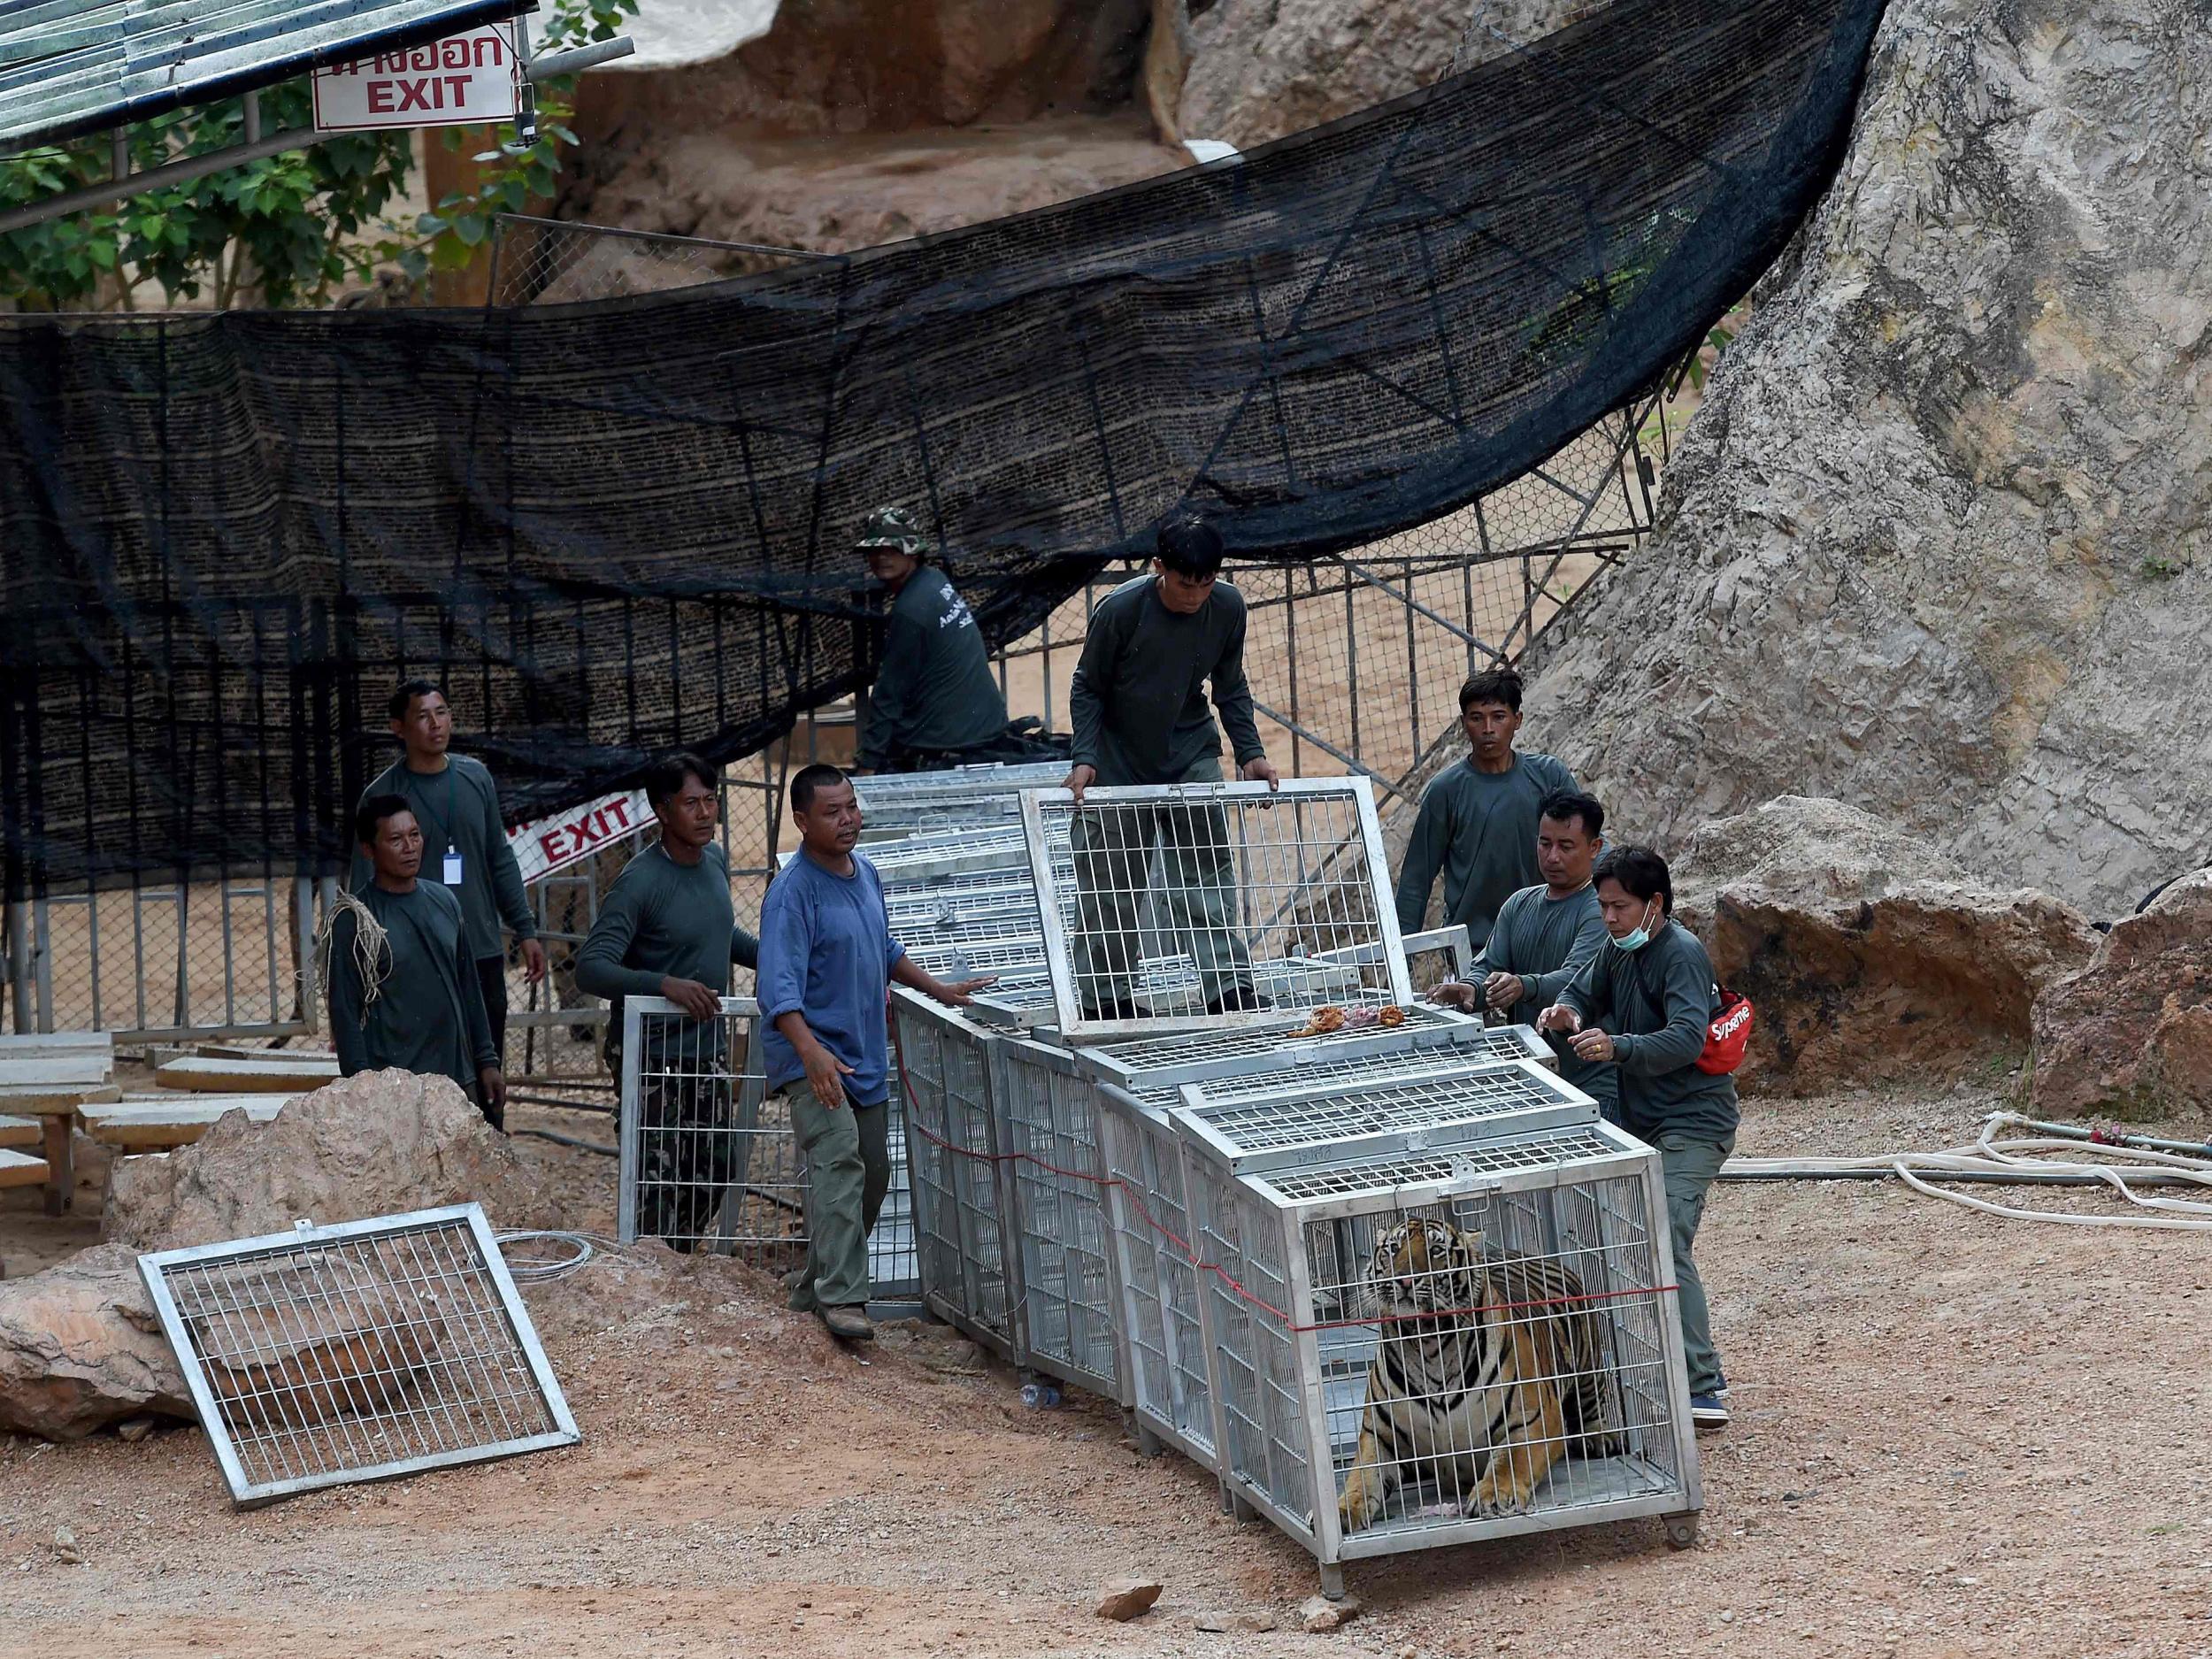 Thai wildlife officials using a tunnel of cages to capture a tiger and remove it from an enclosure at the Tiger Temple in Kanchanaburi province